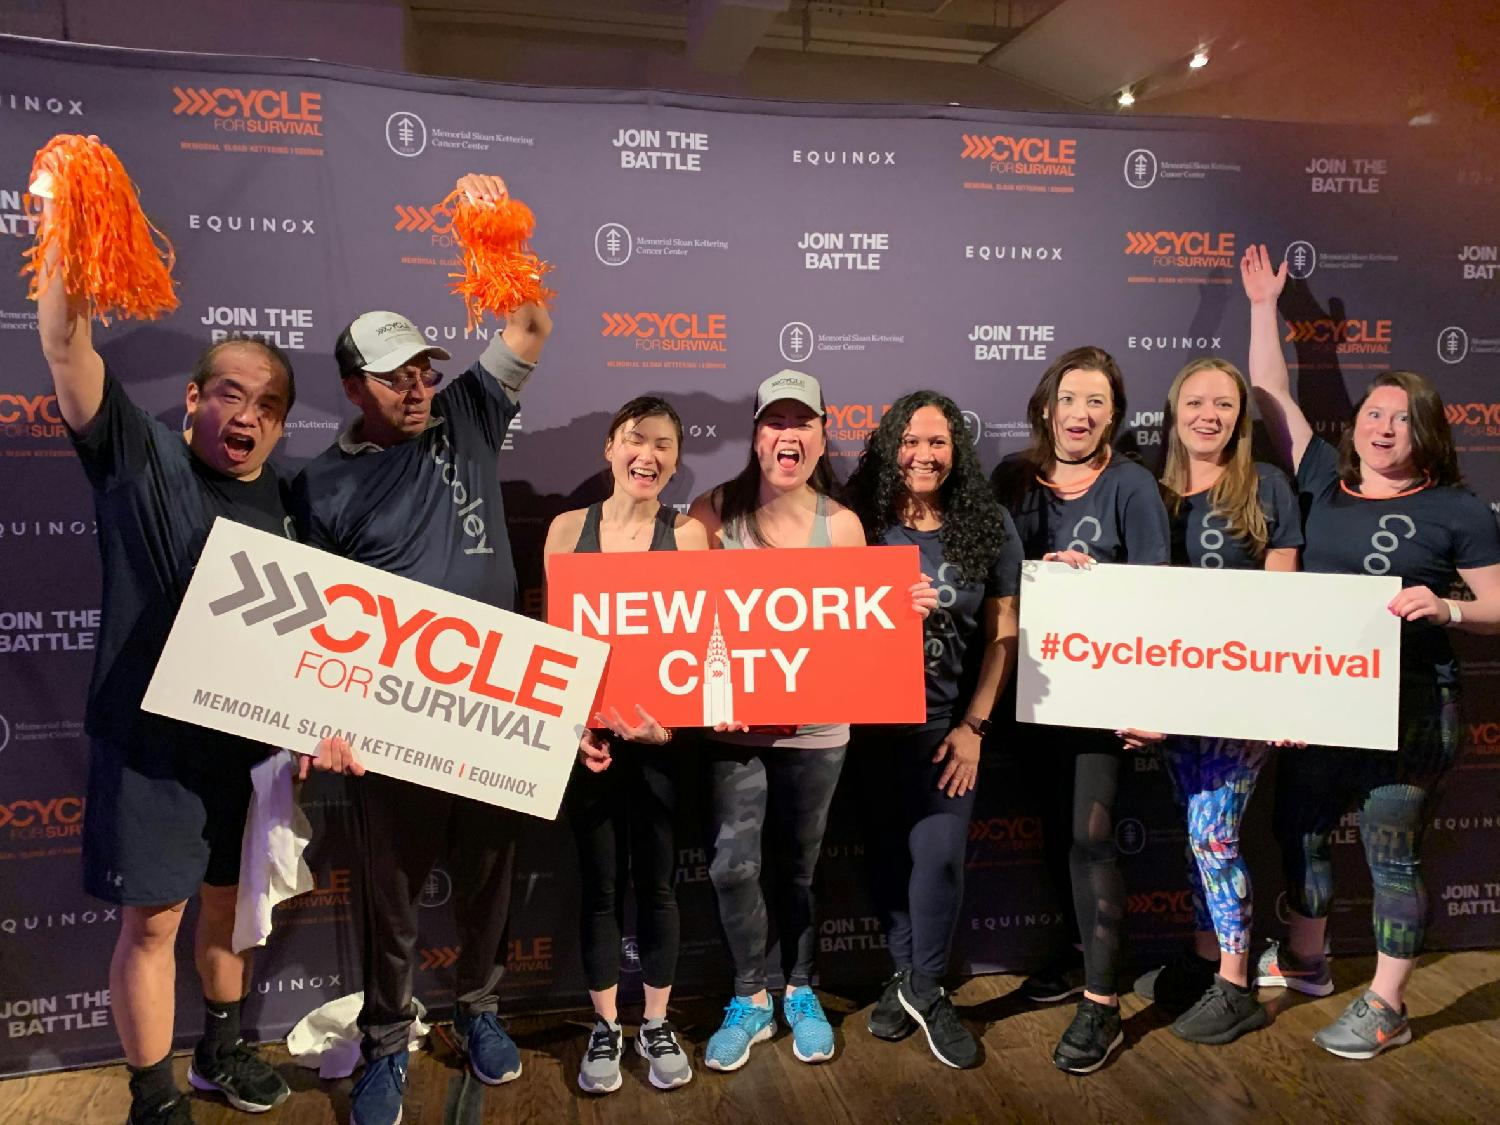 Cooley employees in New York have some fun during a break from sweating it out in Cycle For Survival.